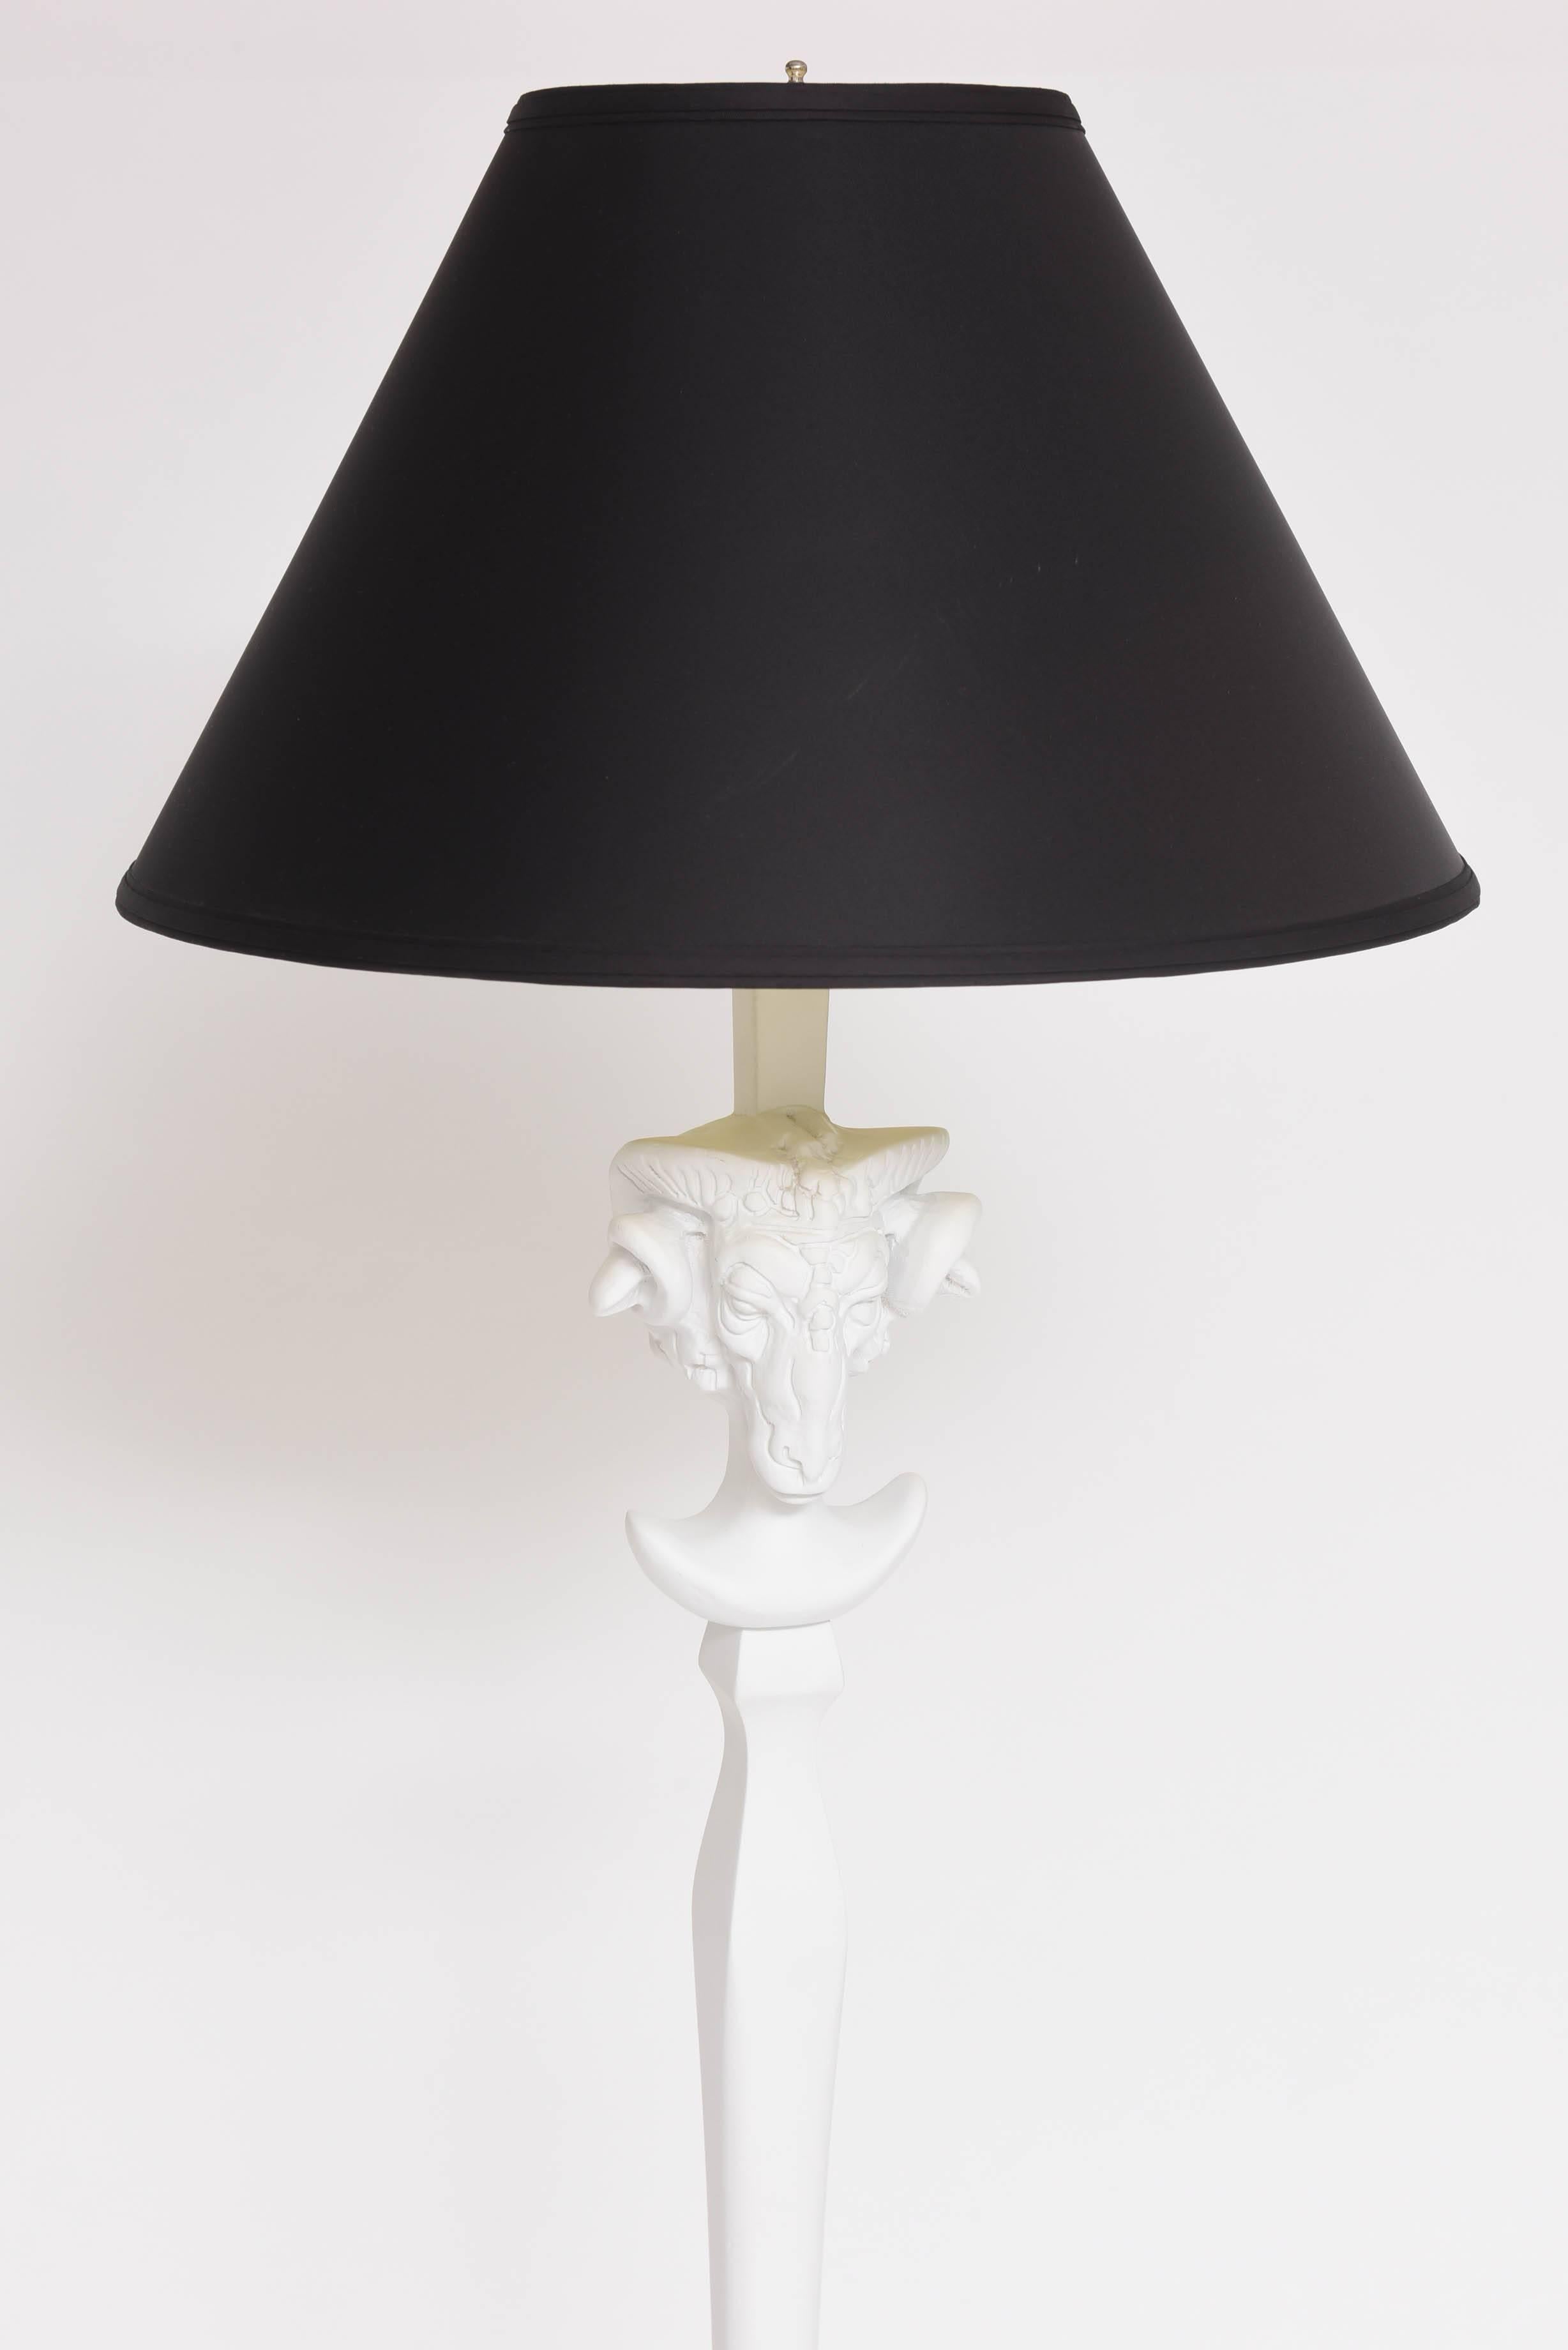 This pair of floor lamps take there inspiration from pieces created by Sirmos with their white plaster-like-finish. The rams head and hooves pay homage to the astrological sign of Taurus.

